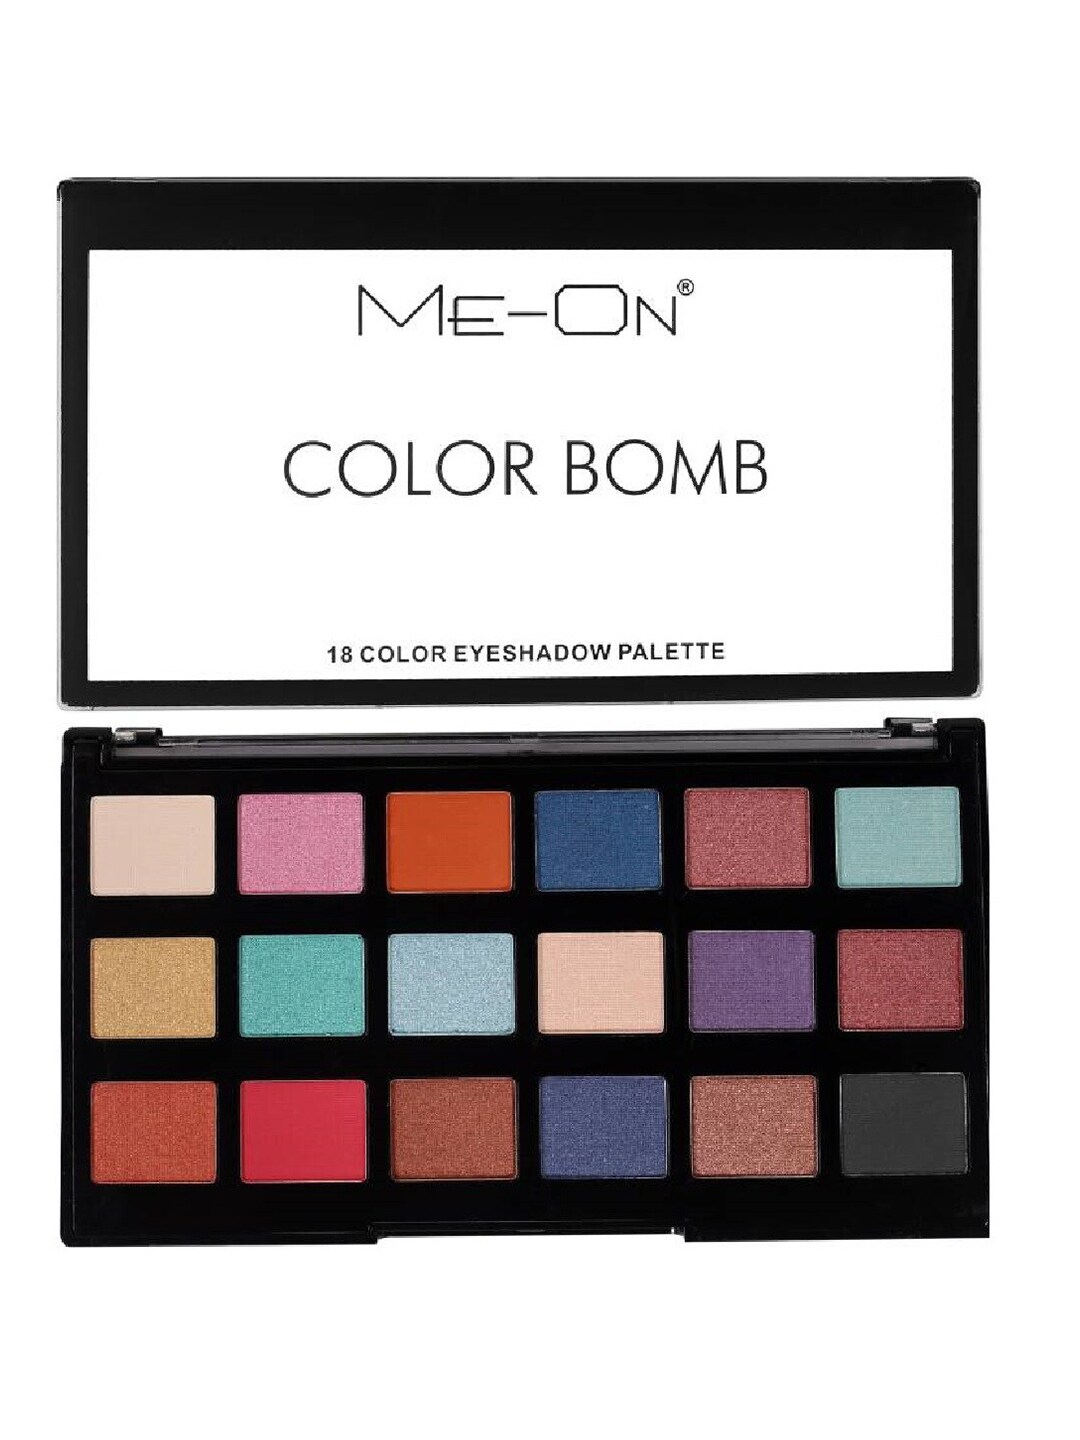 ME-ON Eyeshadow Palette - Color Bomb Price in India